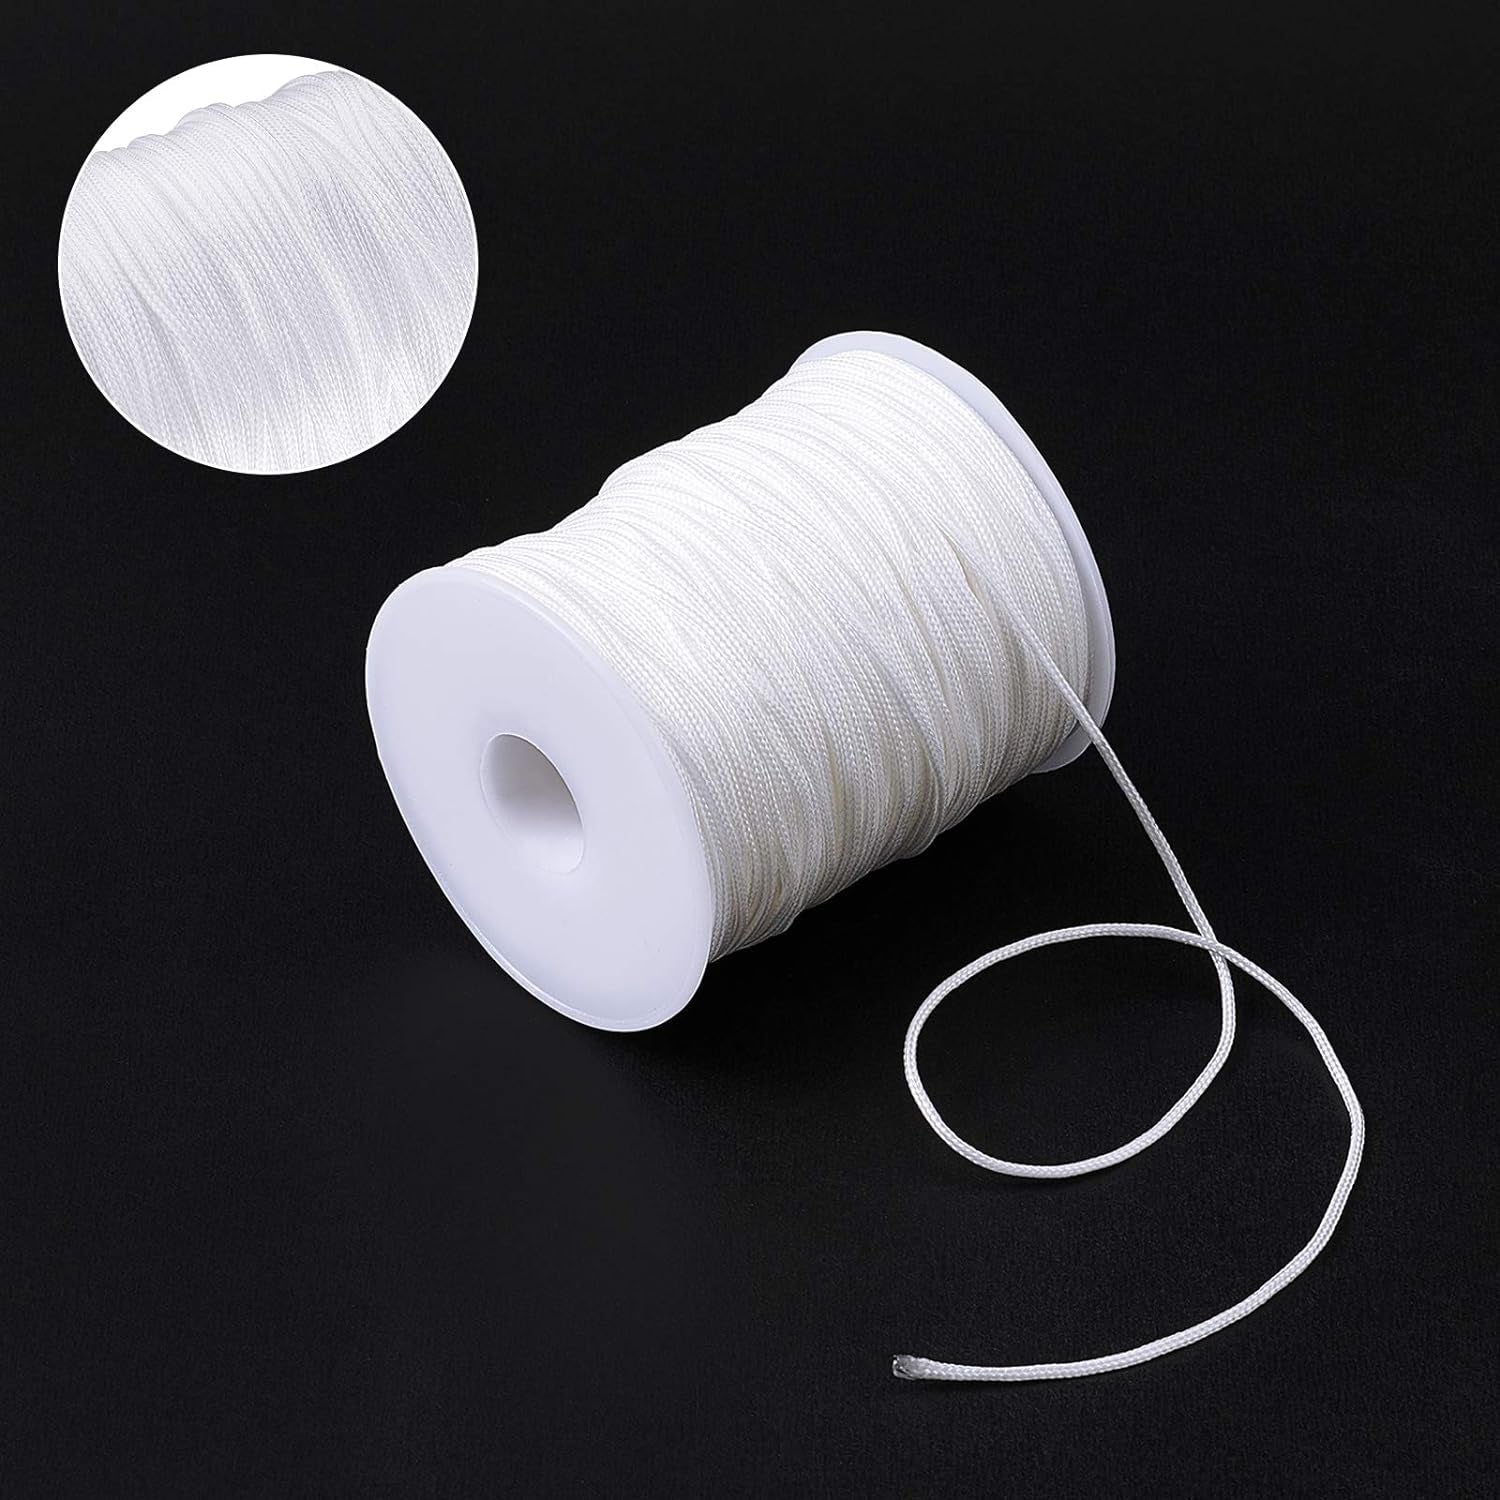 AHANDMAKER 100 Yards 1.5Mm White Nylon Braided Lift Shade Cord, Roll Blind Replacement String with 5Pcs Wood Pendant, Blinds Cord String Kit for Window Blinds Roman Shade Repair, Gardening Plant Craft